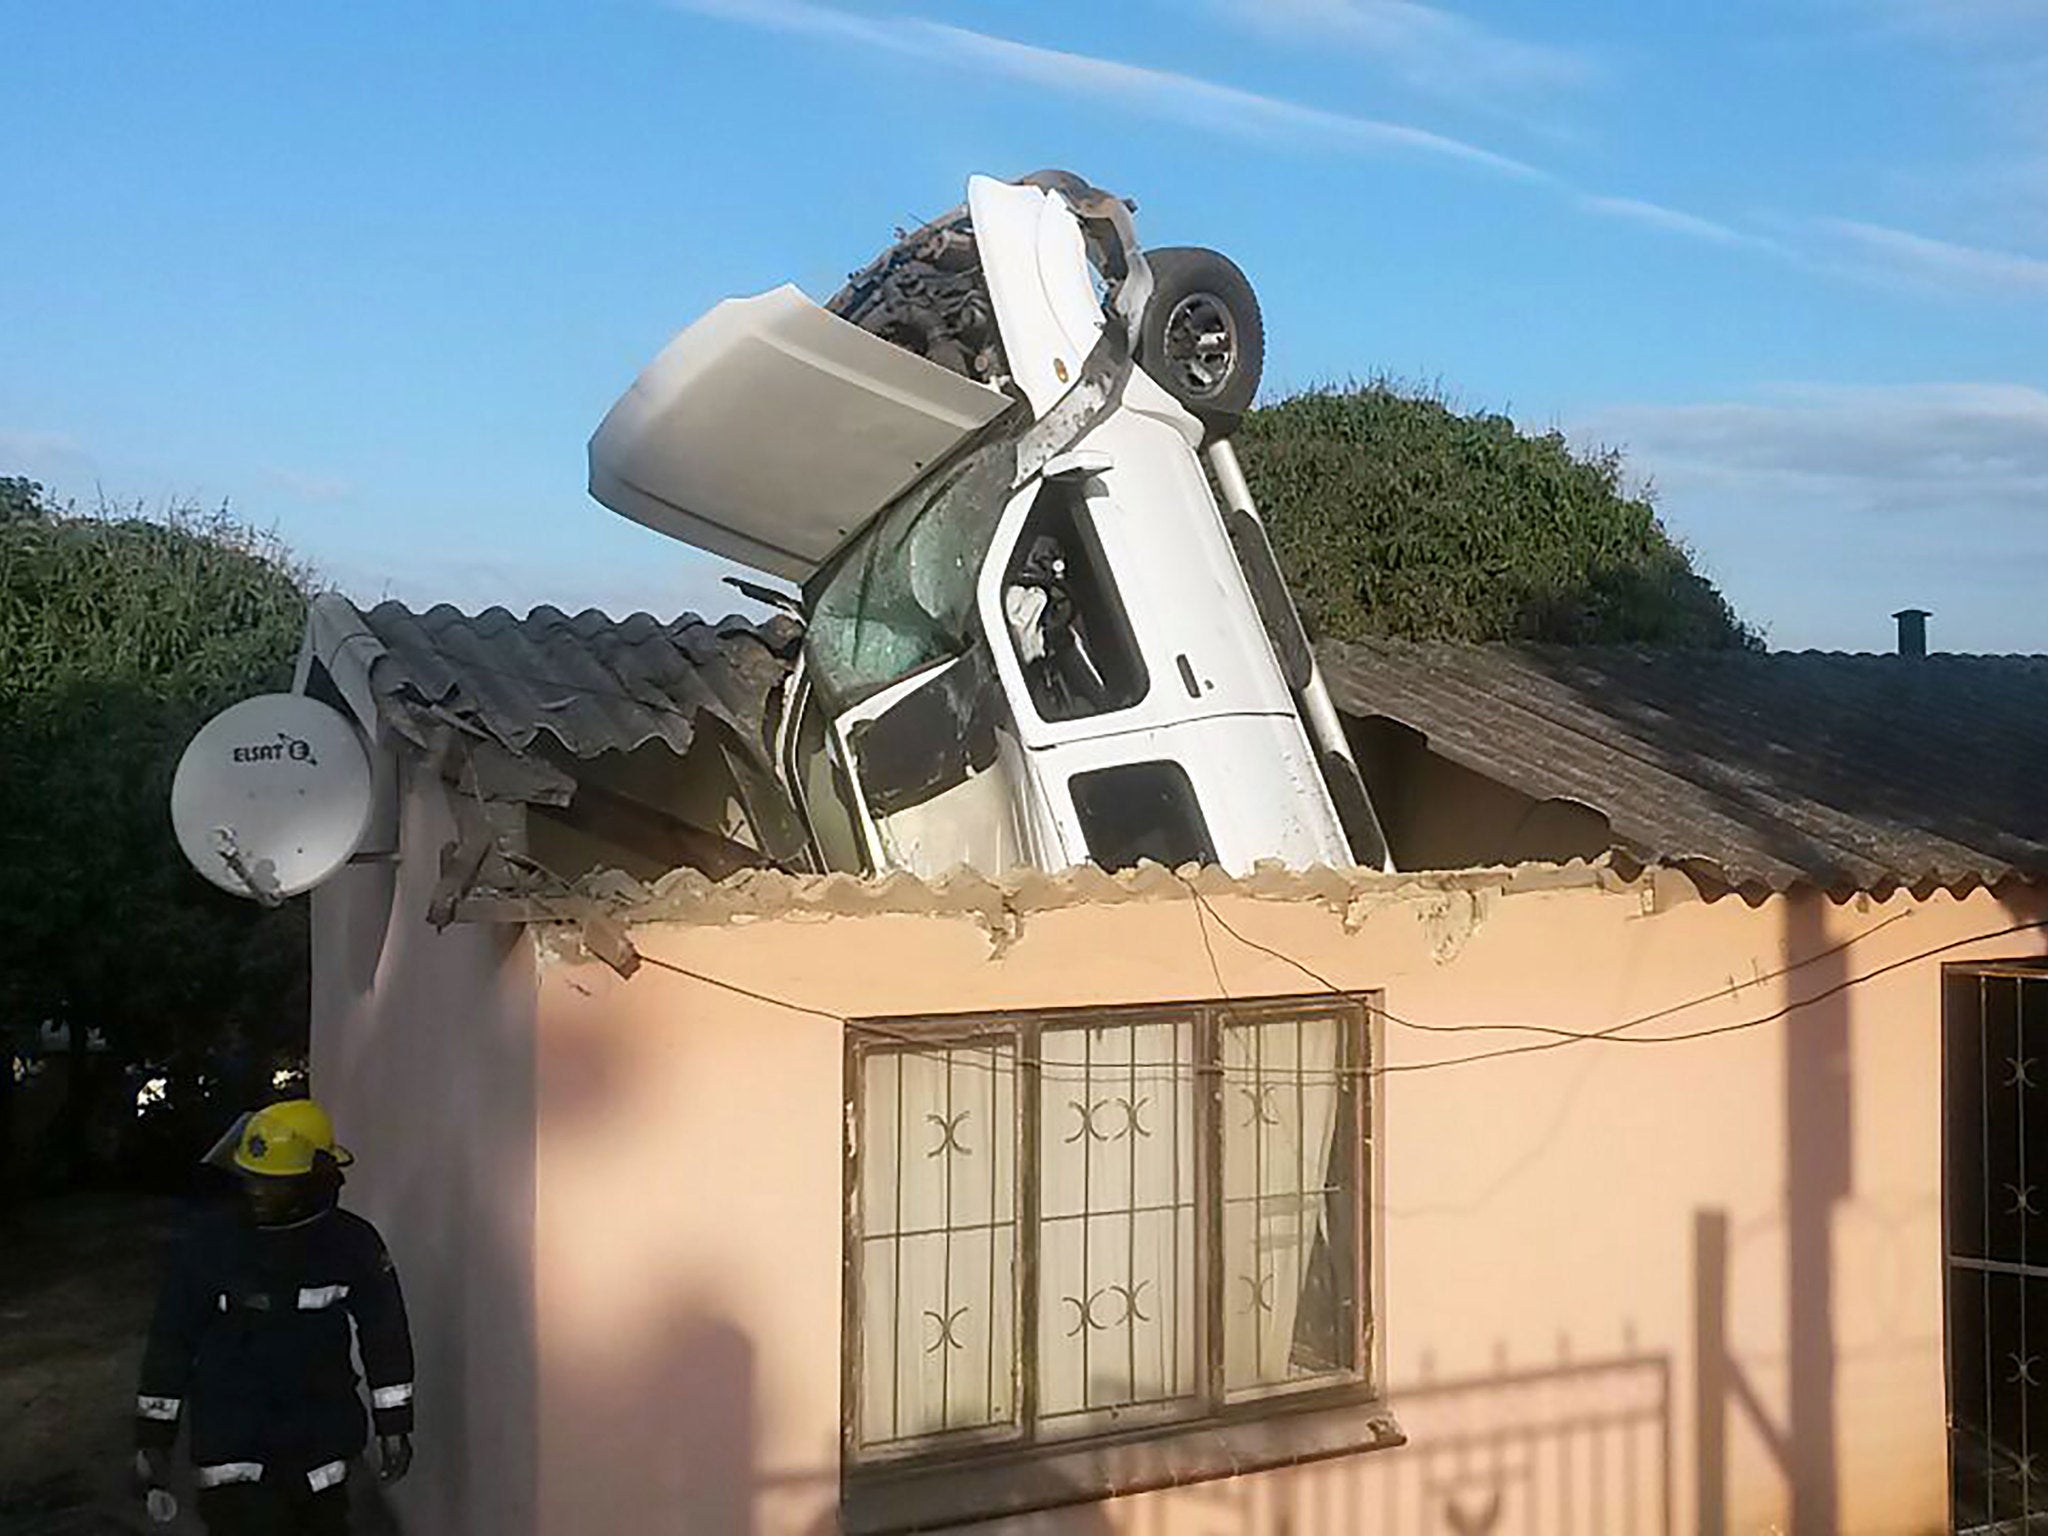 A full explanation for how the car crashed through the roof has still not been found